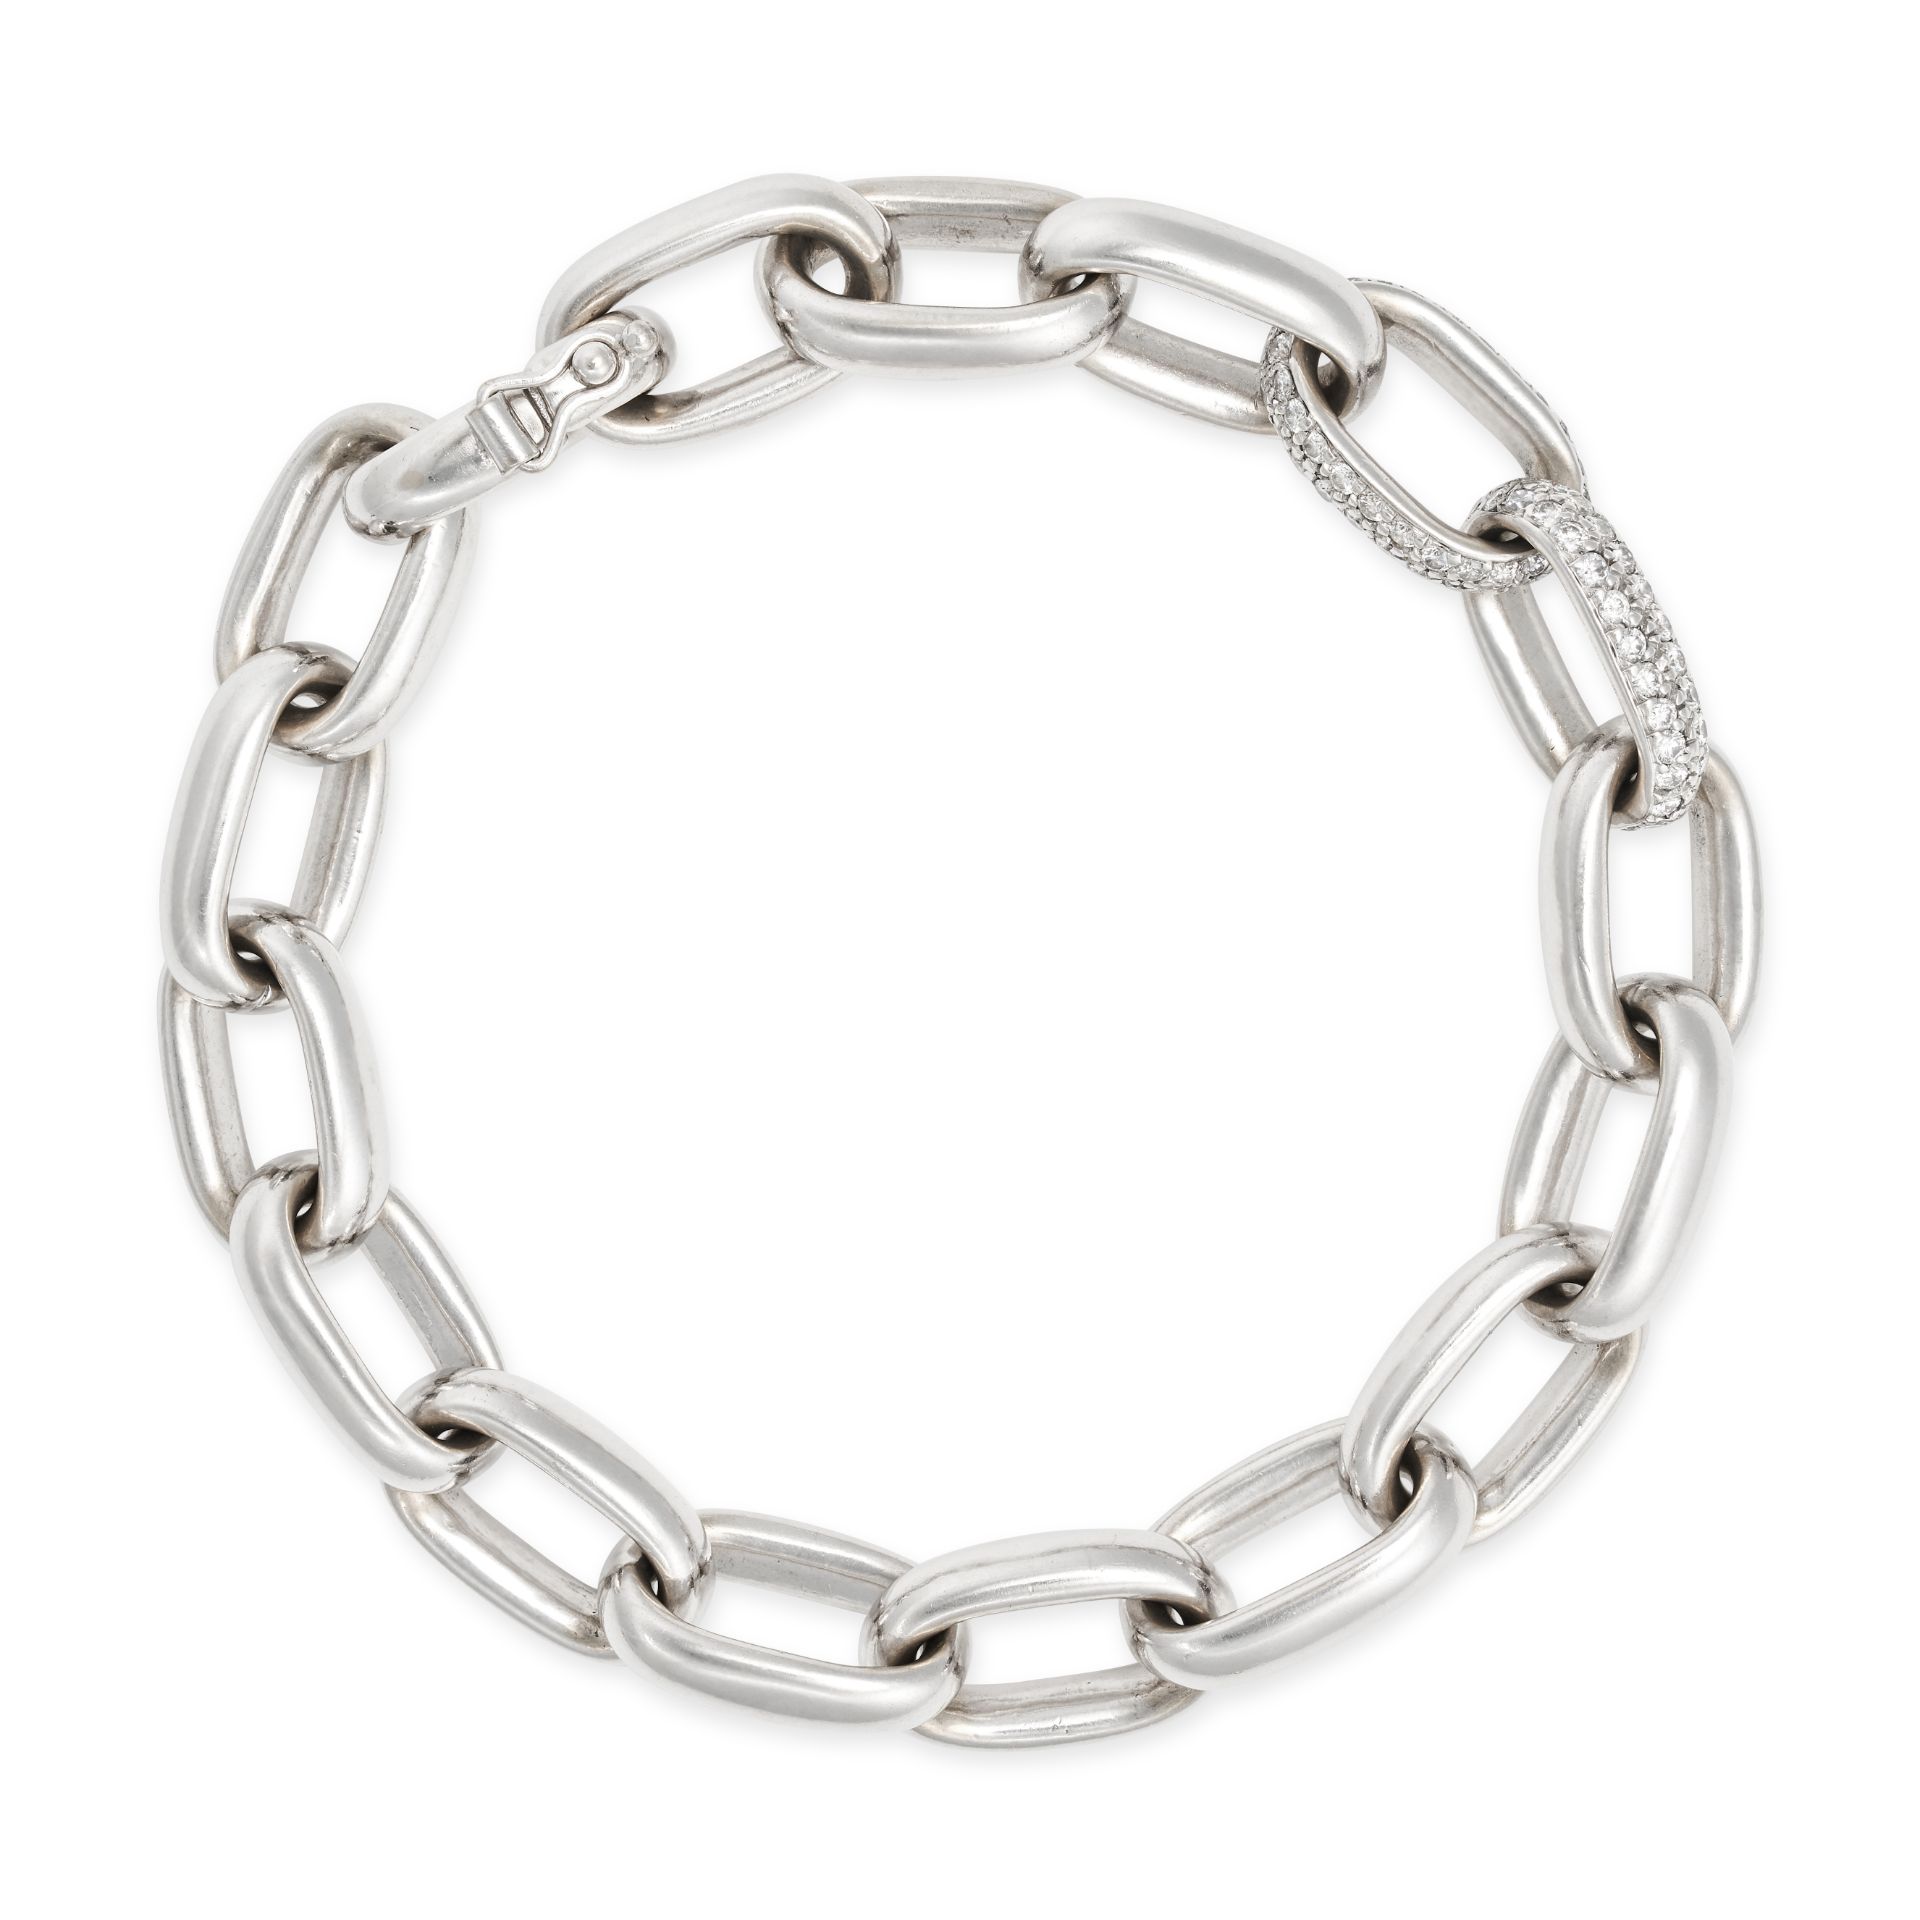 NO RESERVE - A DIAMOND BRACELET in 18ct white gold, comprising a row of interlocking oval links t...